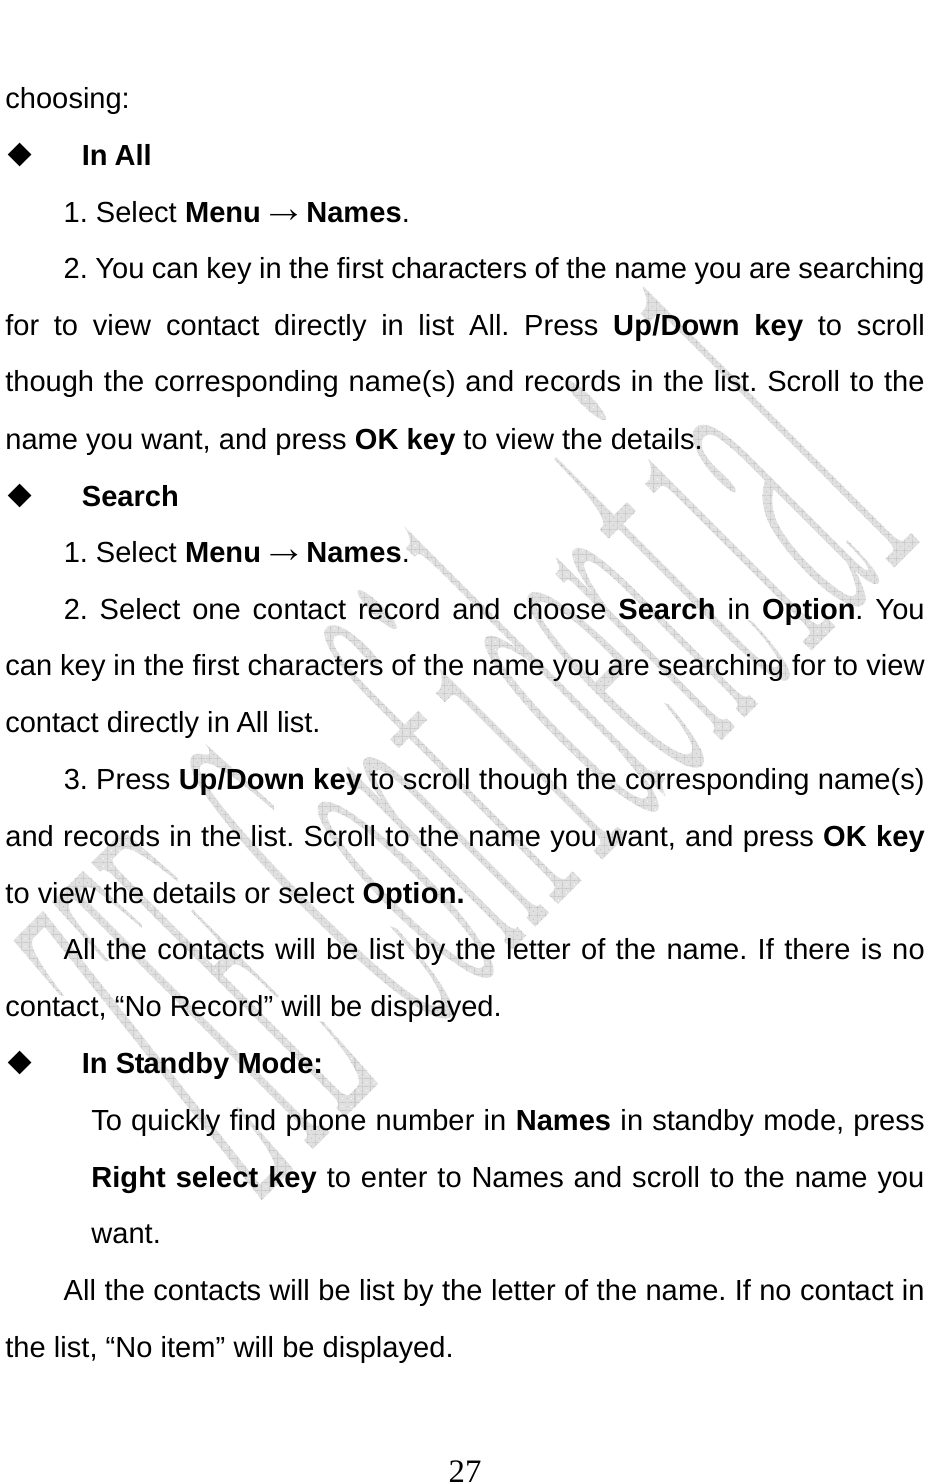                              27choosing:   In All   1. Select Menu → Names.  2. You can key in the first characters of the name you are searching for to view contact directly in list All. Press Up/Down key to scroll though the corresponding name(s) and records in the list. Scroll to the name you want, and press OK key to view the details.  Search 1. Select Menu → Names. 2. Select one contact record and choose Search in Option. You can key in the first characters of the name you are searching for to view contact directly in All list.   3. Press Up/Down key to scroll though the corresponding name(s) and records in the list. Scroll to the name you want, and press OK key to view the details or select Option.  All the contacts will be list by the letter of the name. If there is no contact, “No Record” will be displayed.    In Standby Mode:   To quickly find phone number in Names in standby mode, press Right select key to enter to Names and scroll to the name you want.  All the contacts will be list by the letter of the name. If no contact in the list, “No item” will be displayed. 